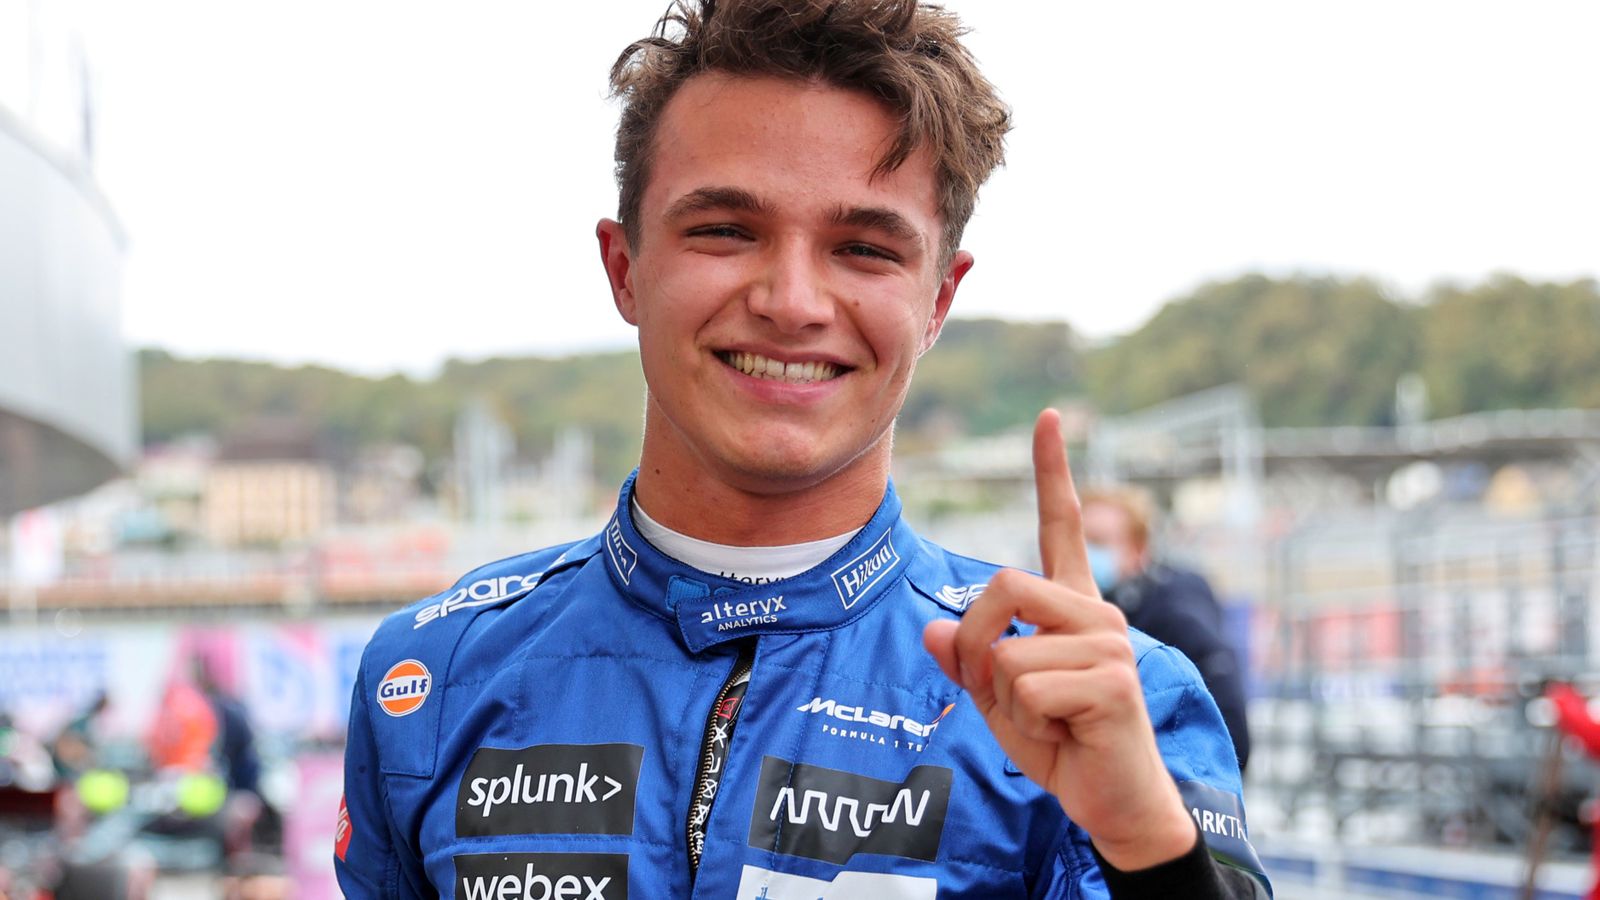 Lando Norris tells what to expect from his scenes in Drive to Survive